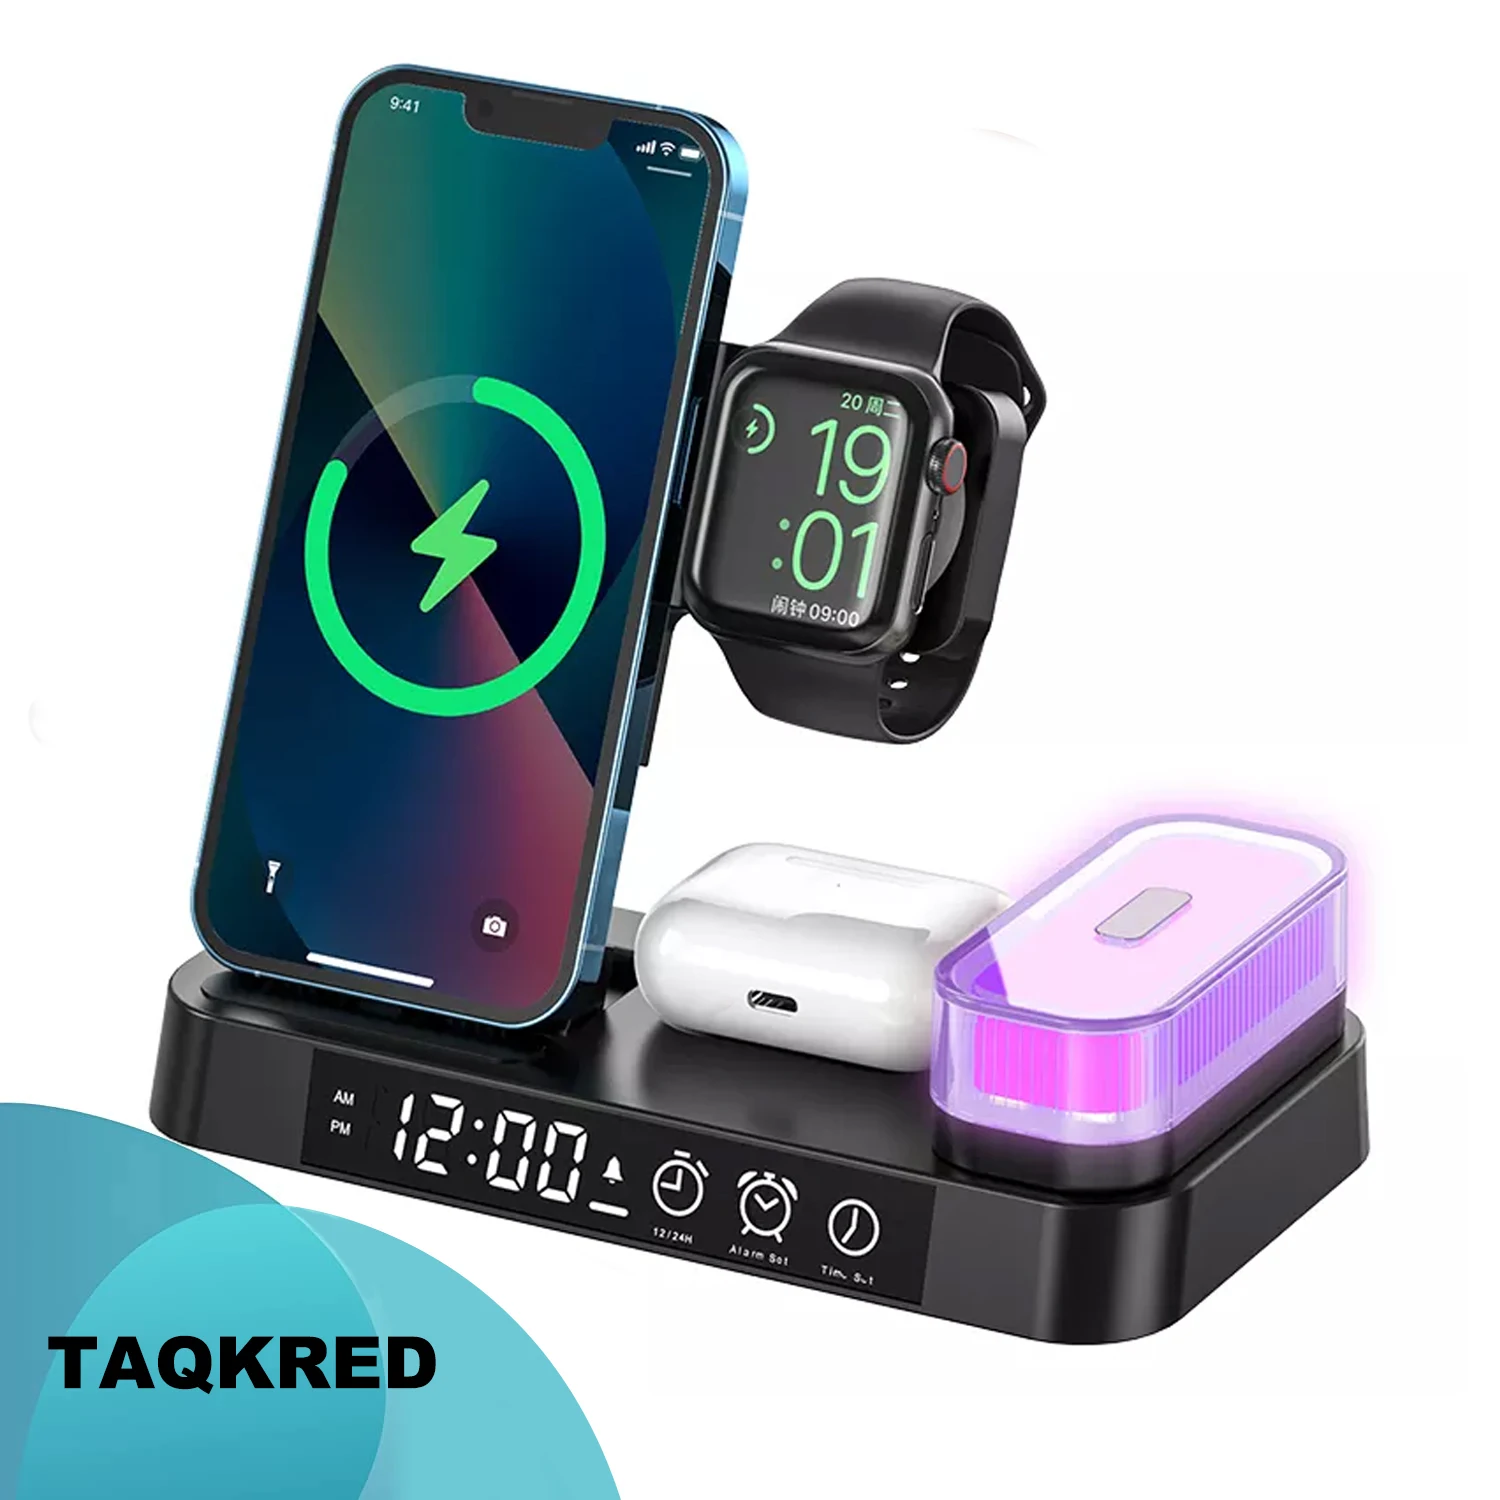 3 In 1 Wireless Charger Stand With RGB LED Clock For Mobile Phone 13 12 Pro iWatch  30W QI Wireless Fast Charging Dock Station